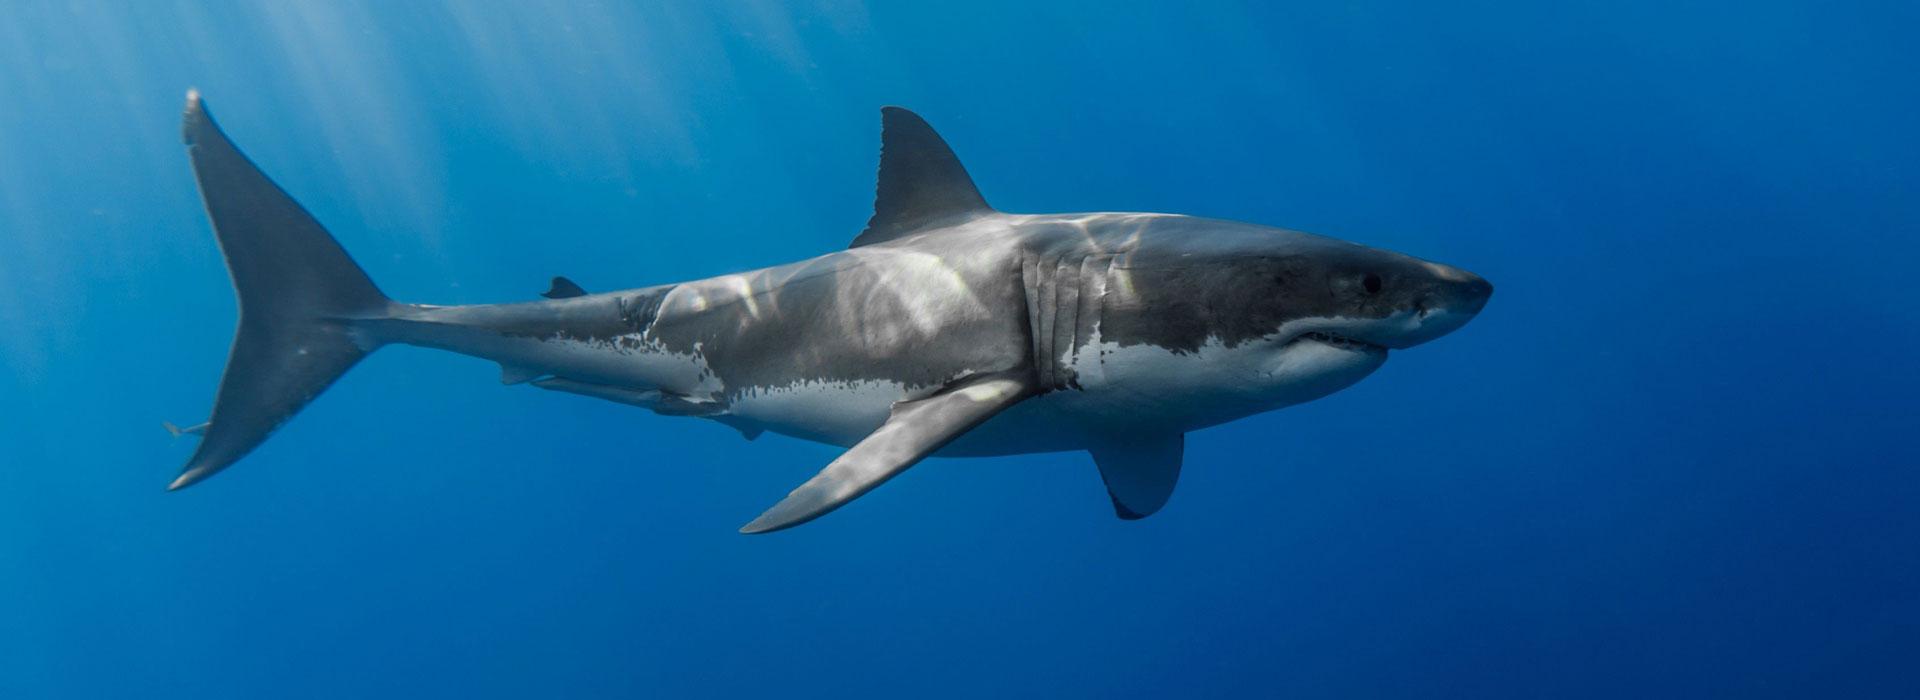 shark-under-waterd Shark Cage Dive South Africa | Great White Shark Tours™